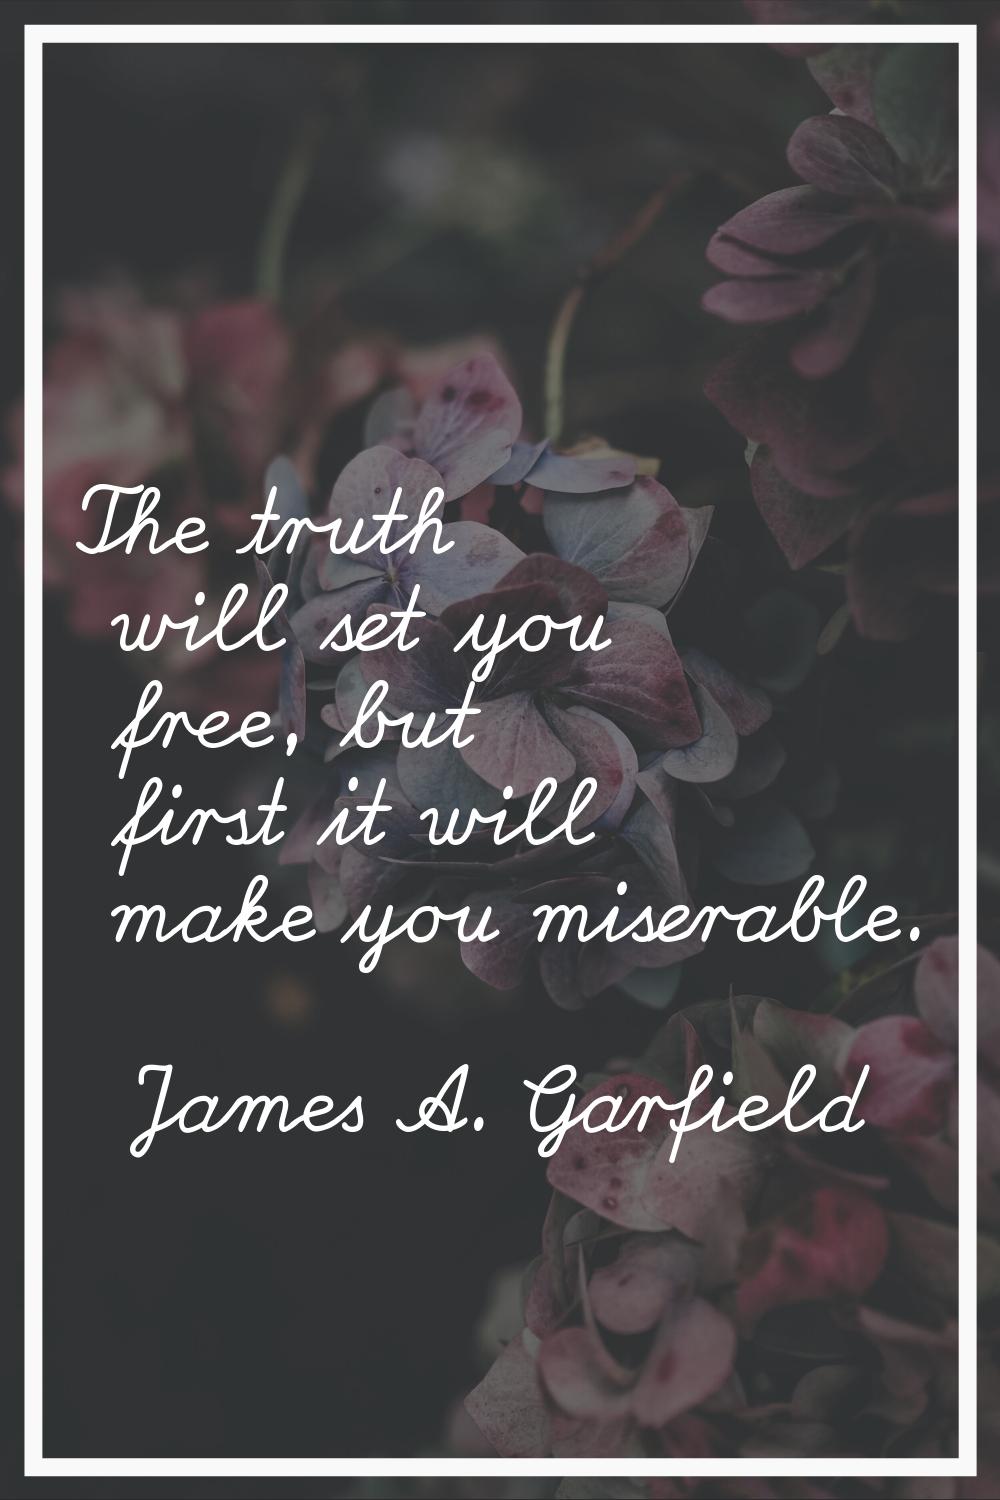 The truth will set you free, but first it will make you miserable.